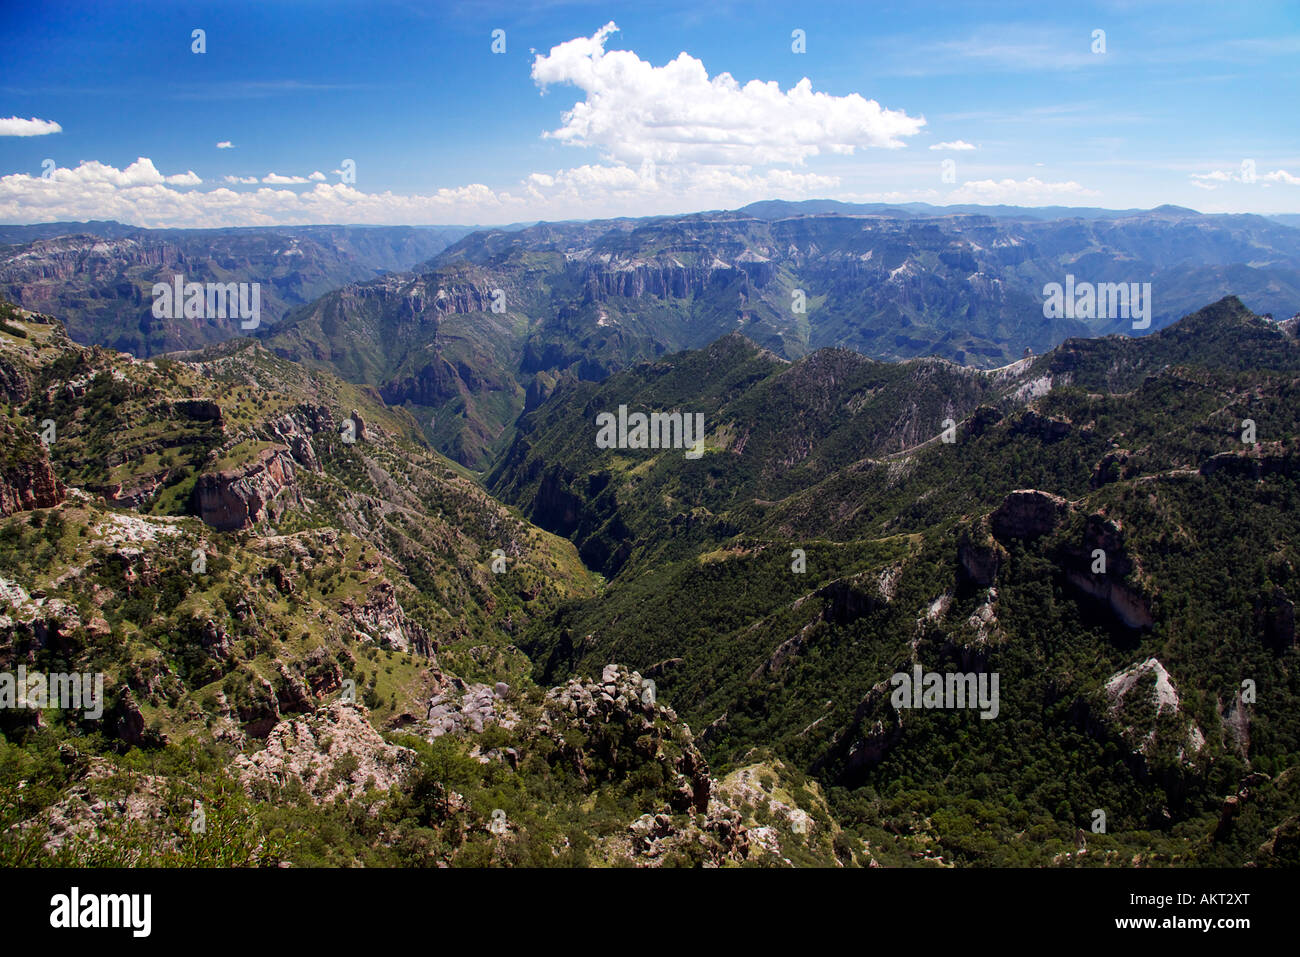 the view at divisadero, a vantage point along the copper canyon railway, mexico Stock Photo